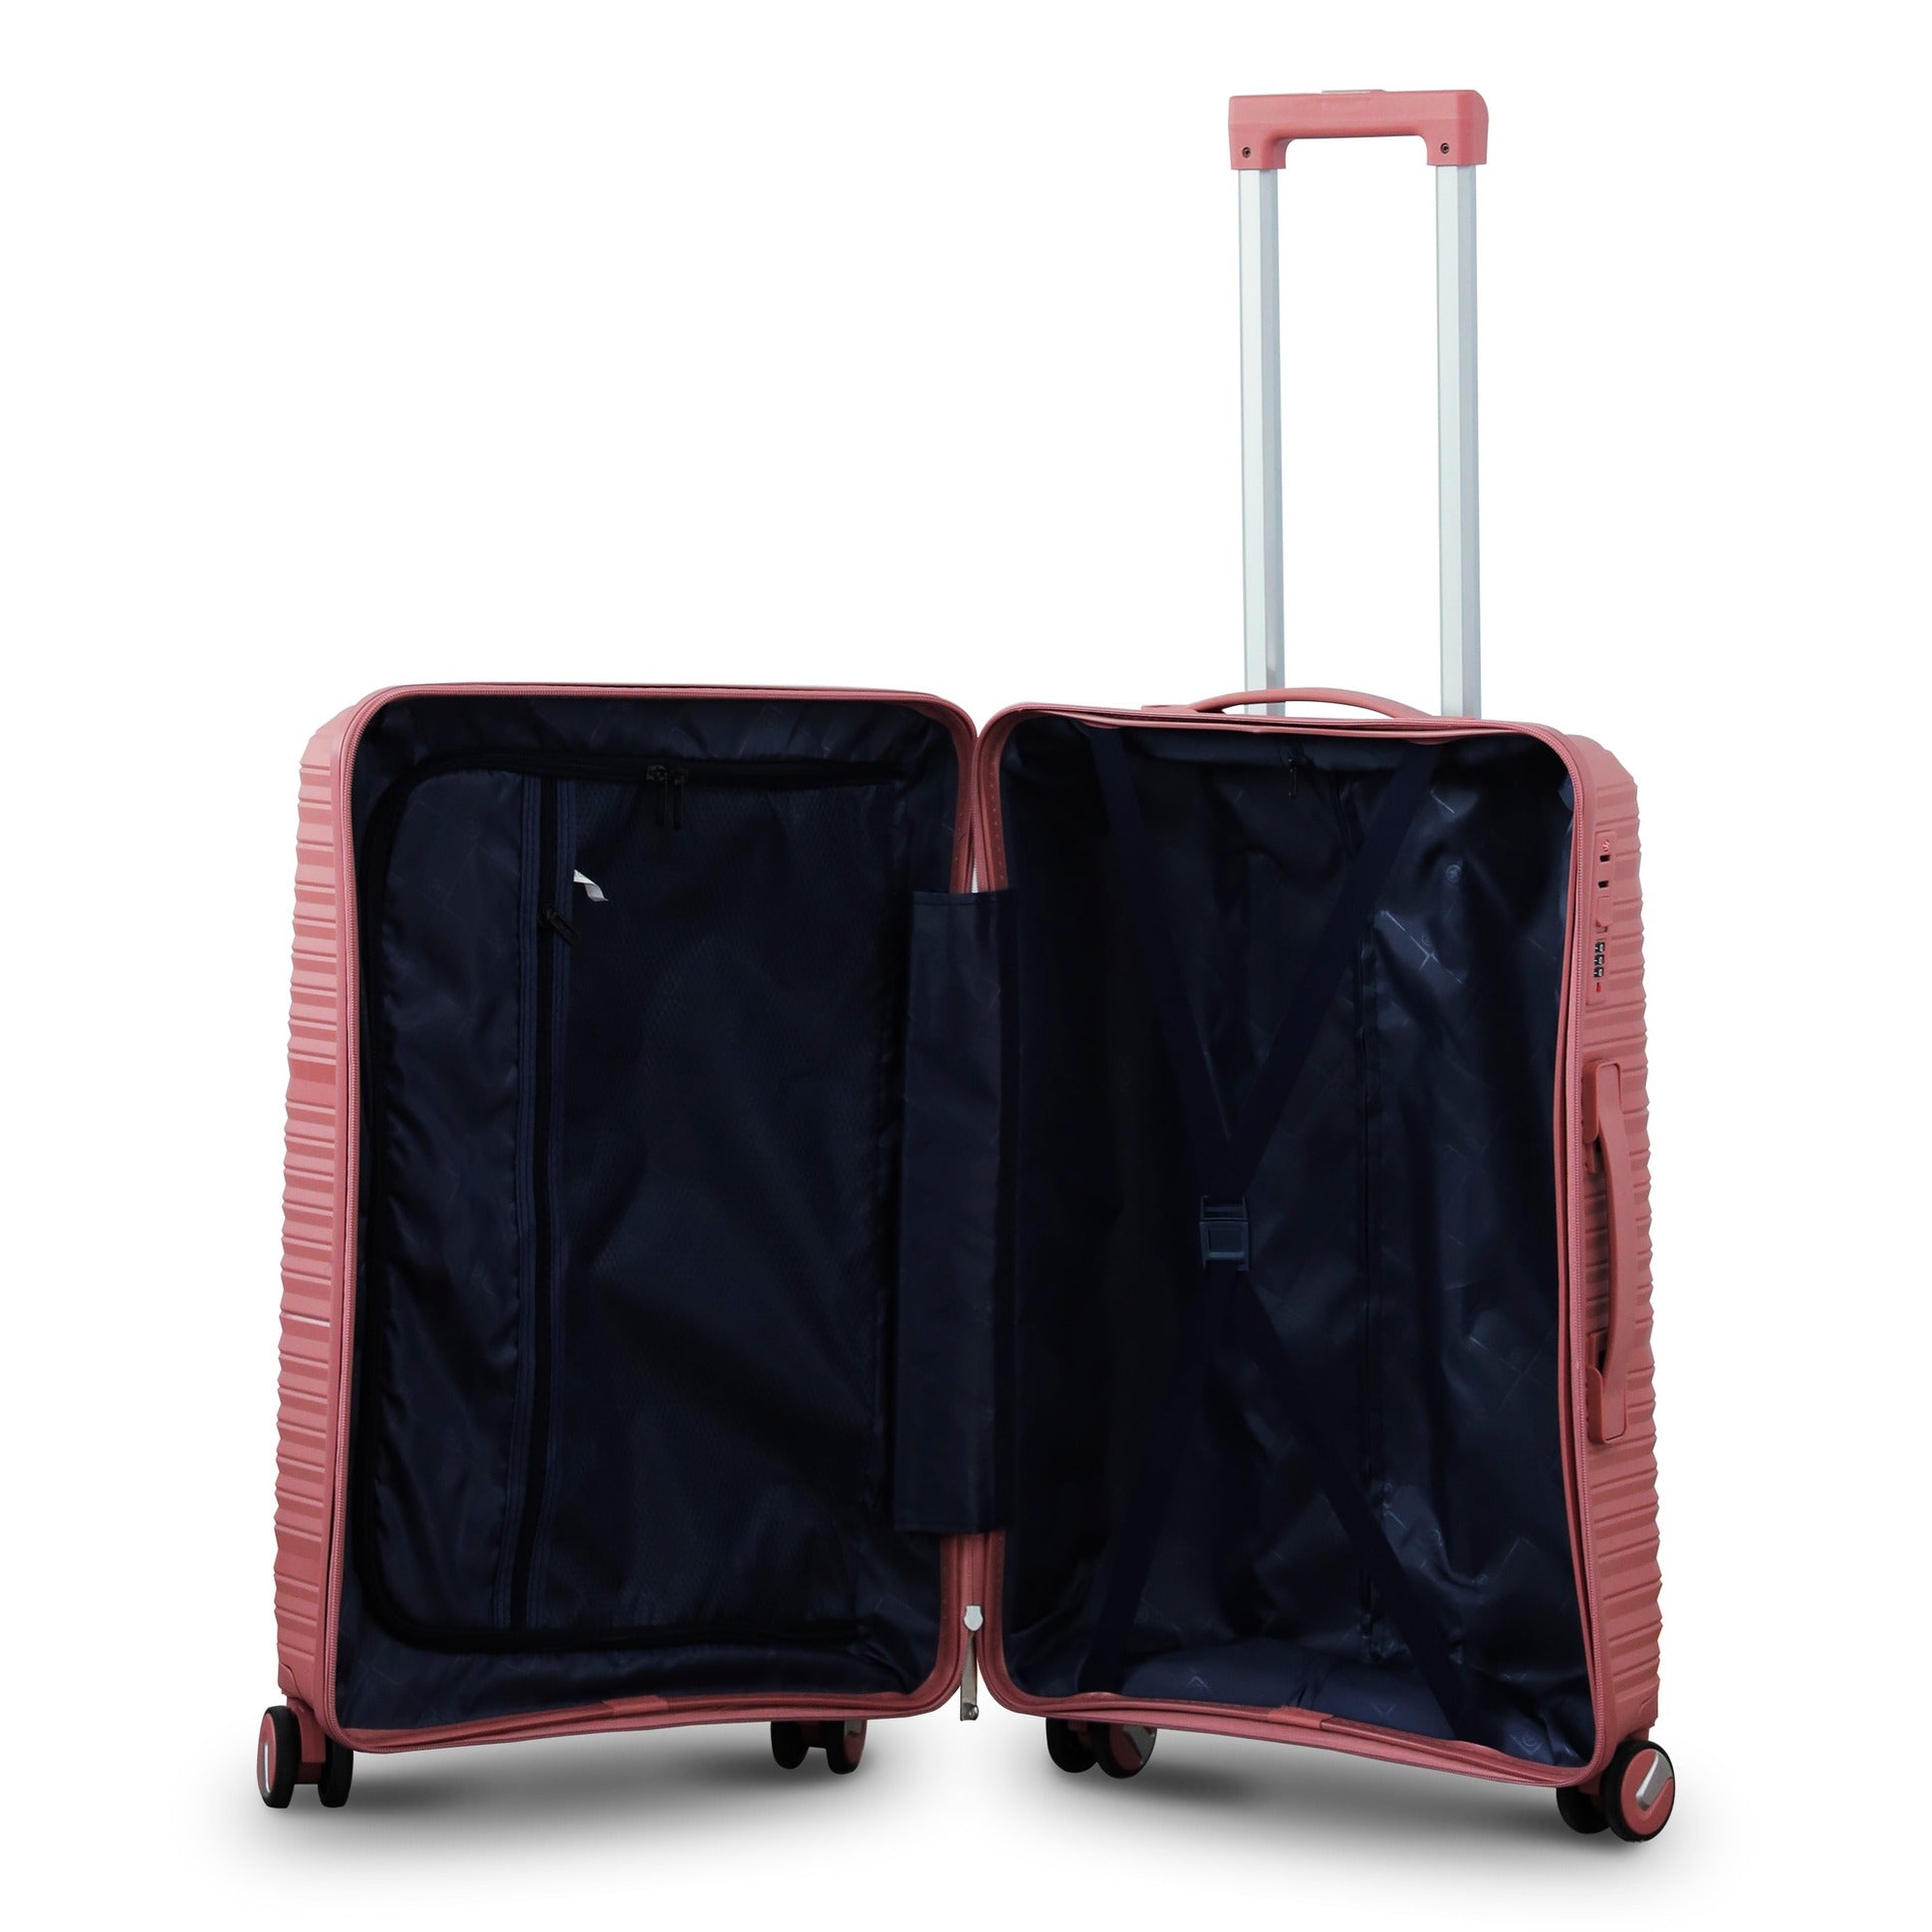 24" Travel Way PP Unbreakable Luggage Bag With Double Spinner Wheel